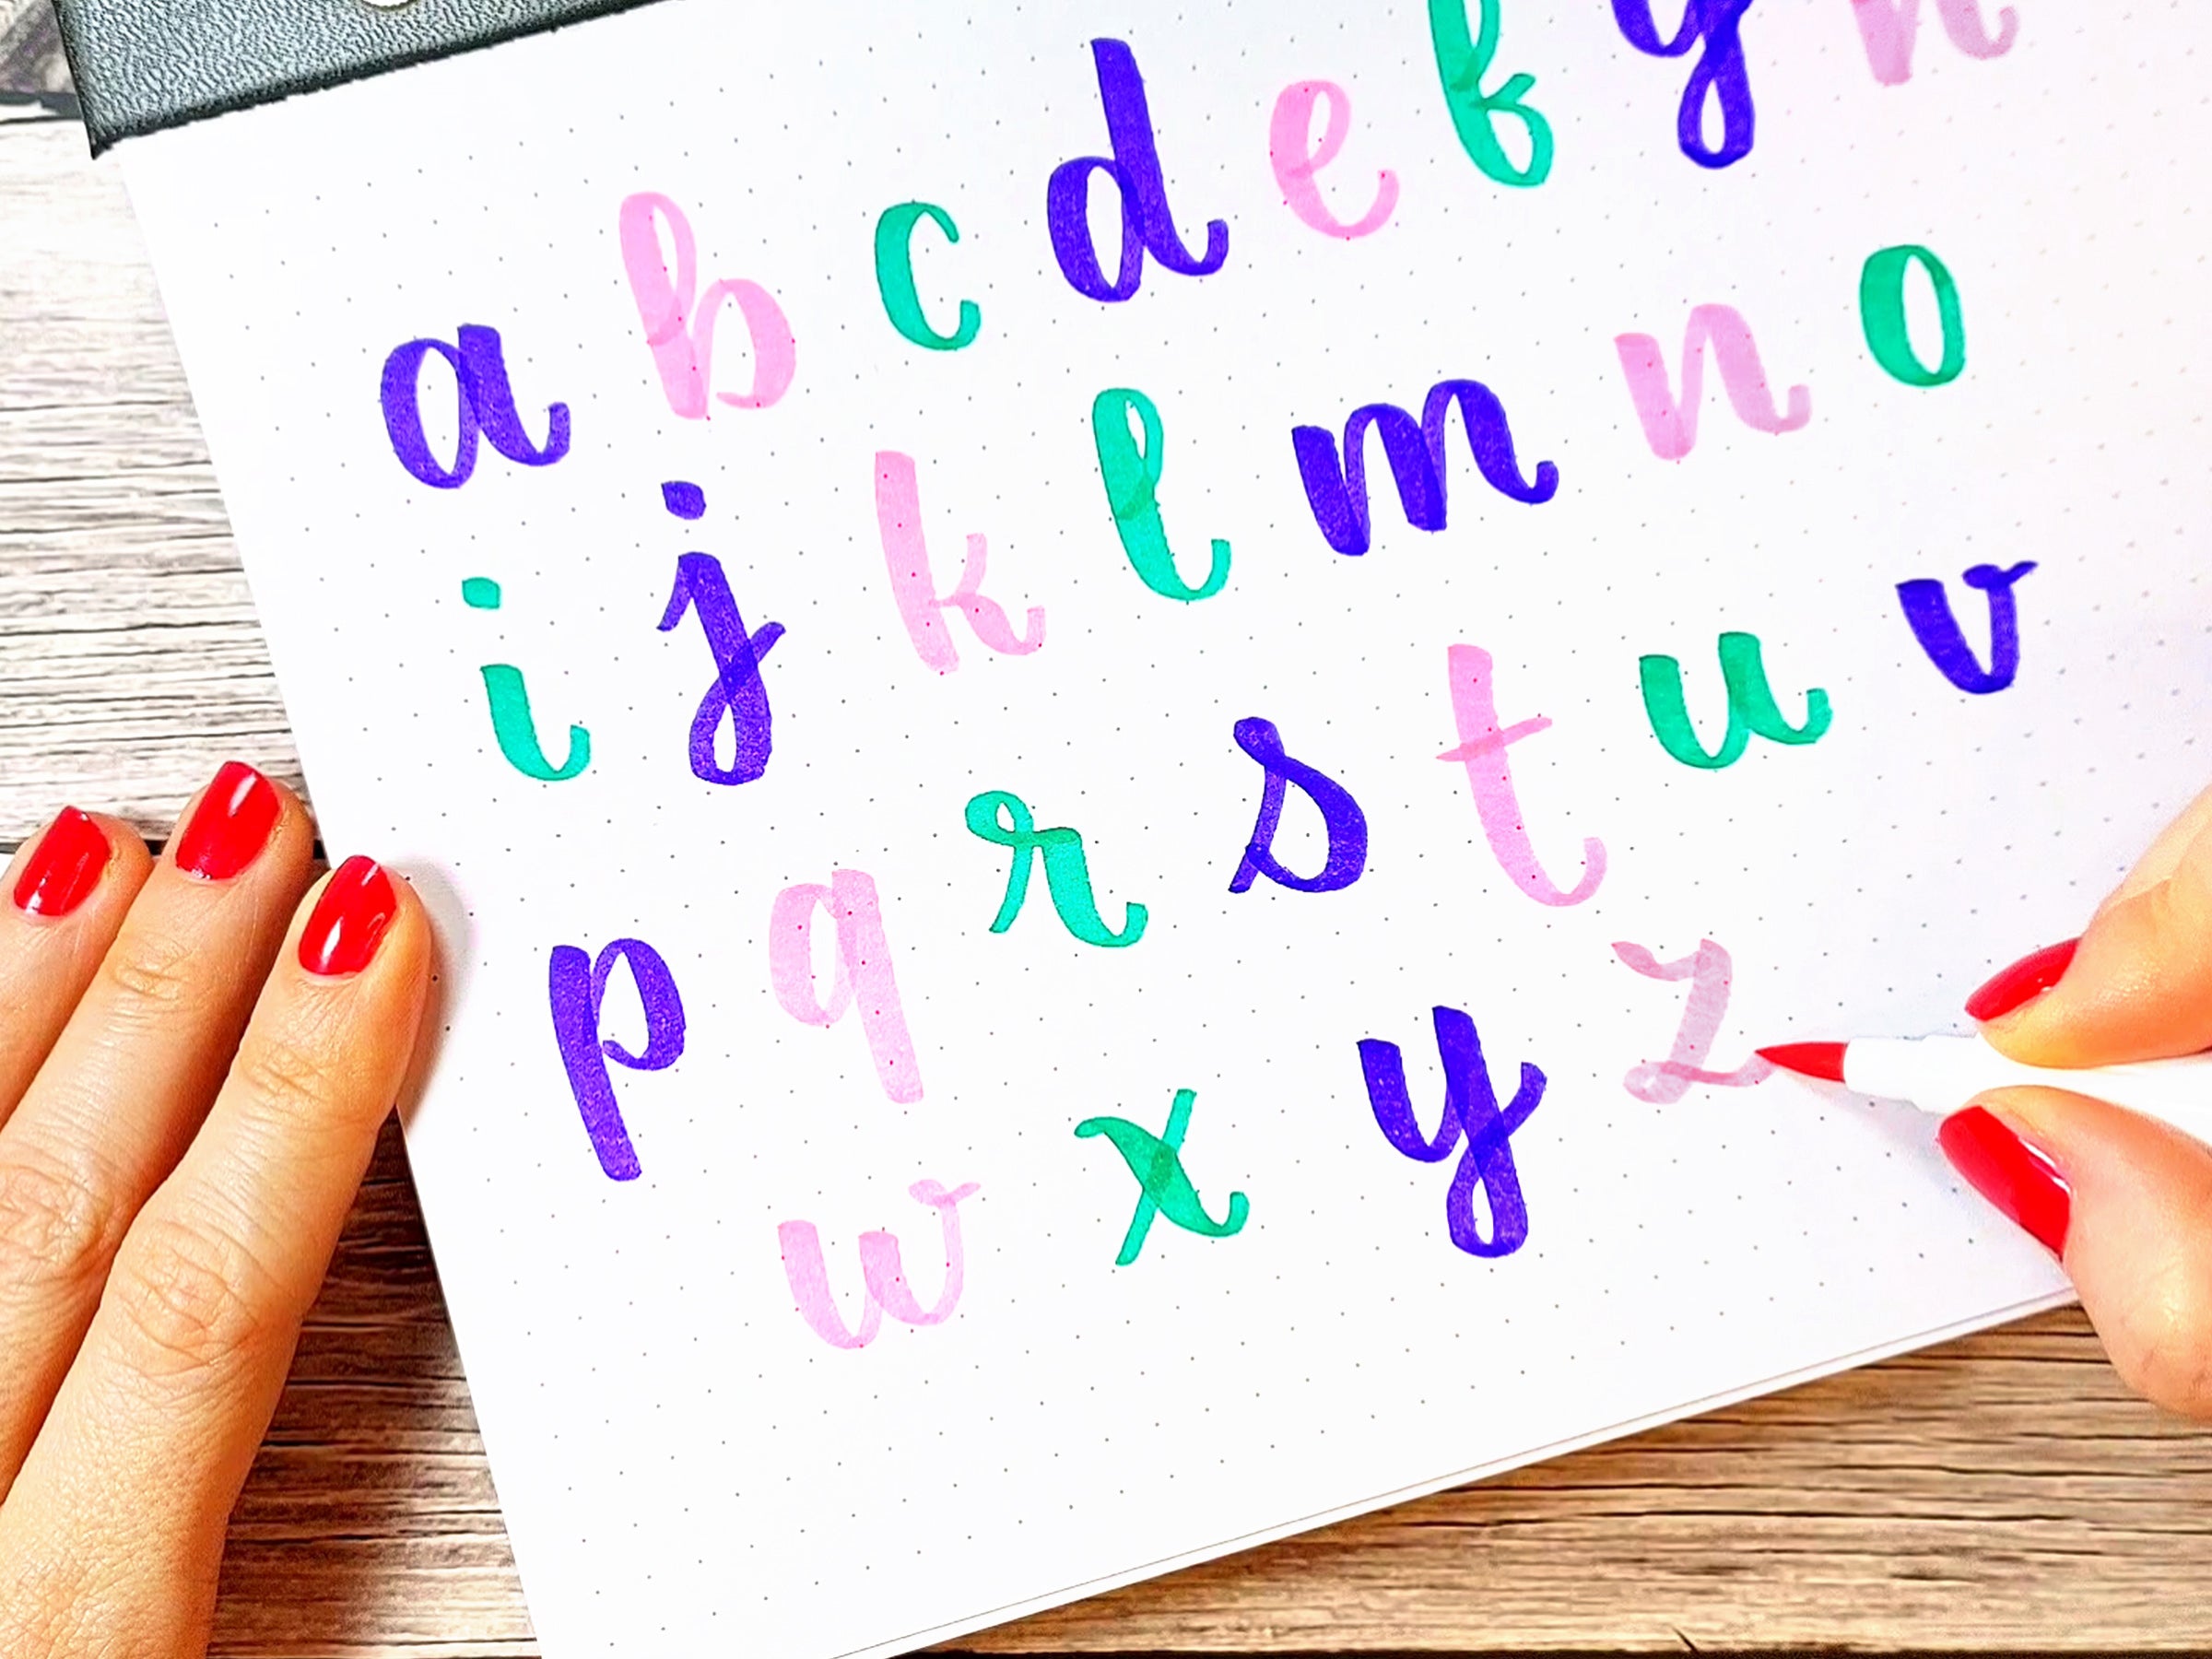 Brush calligraphy from W to Z